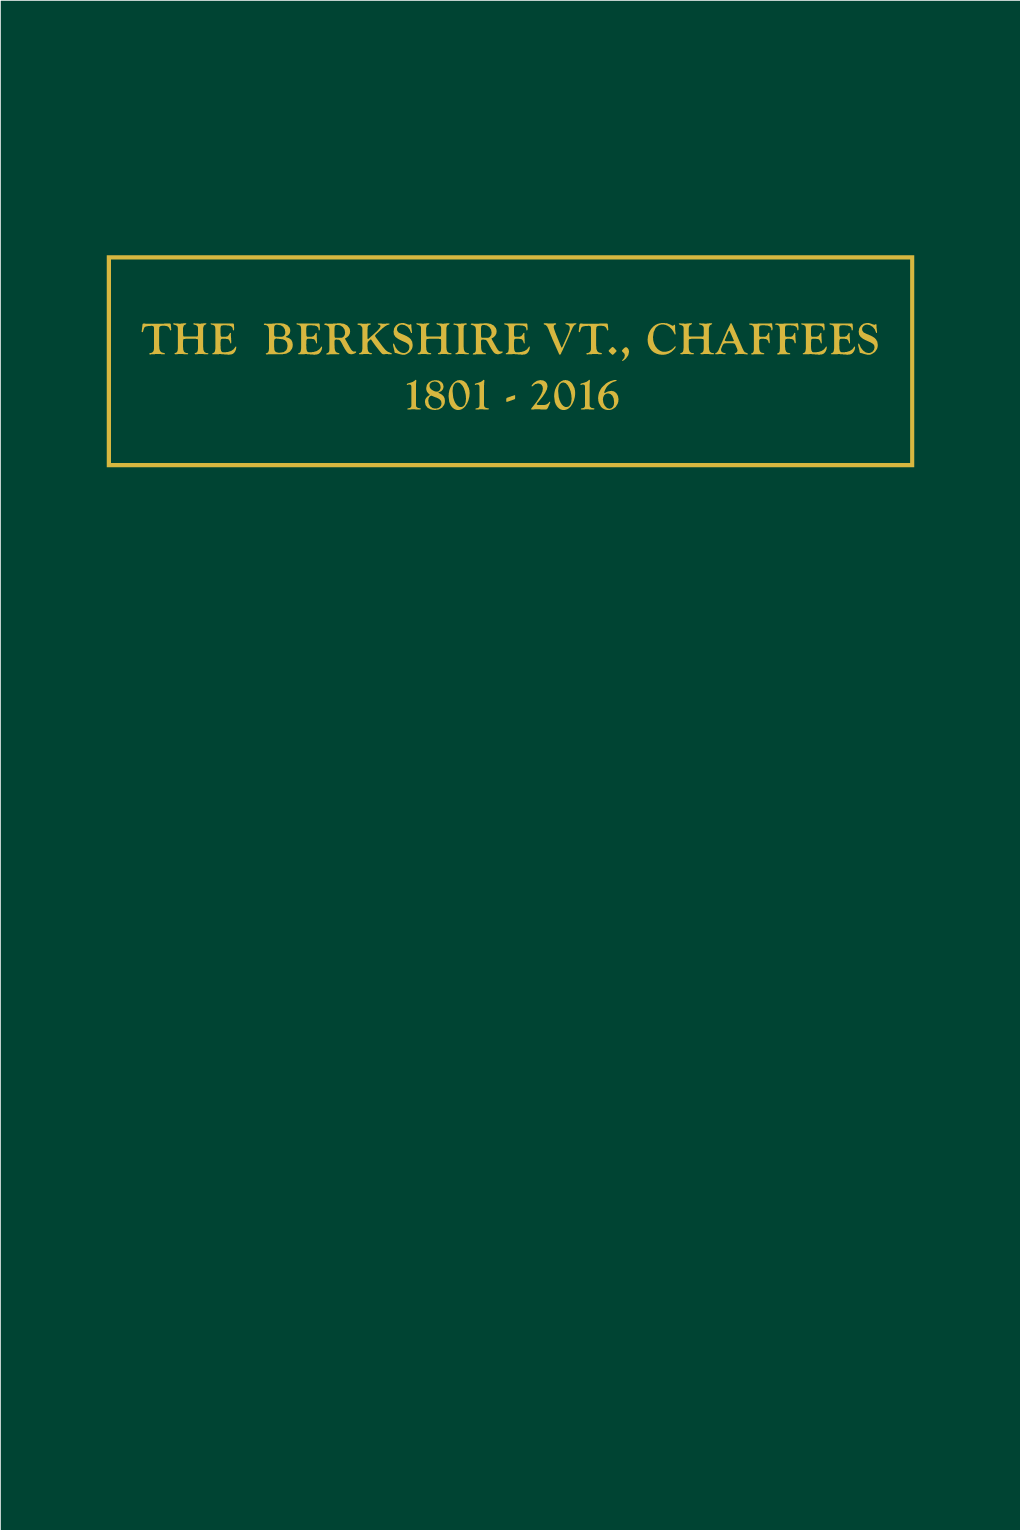 THE BERKSHIRE VT., CHAFFEES 1801 - 2016 Blank Page Blank Page